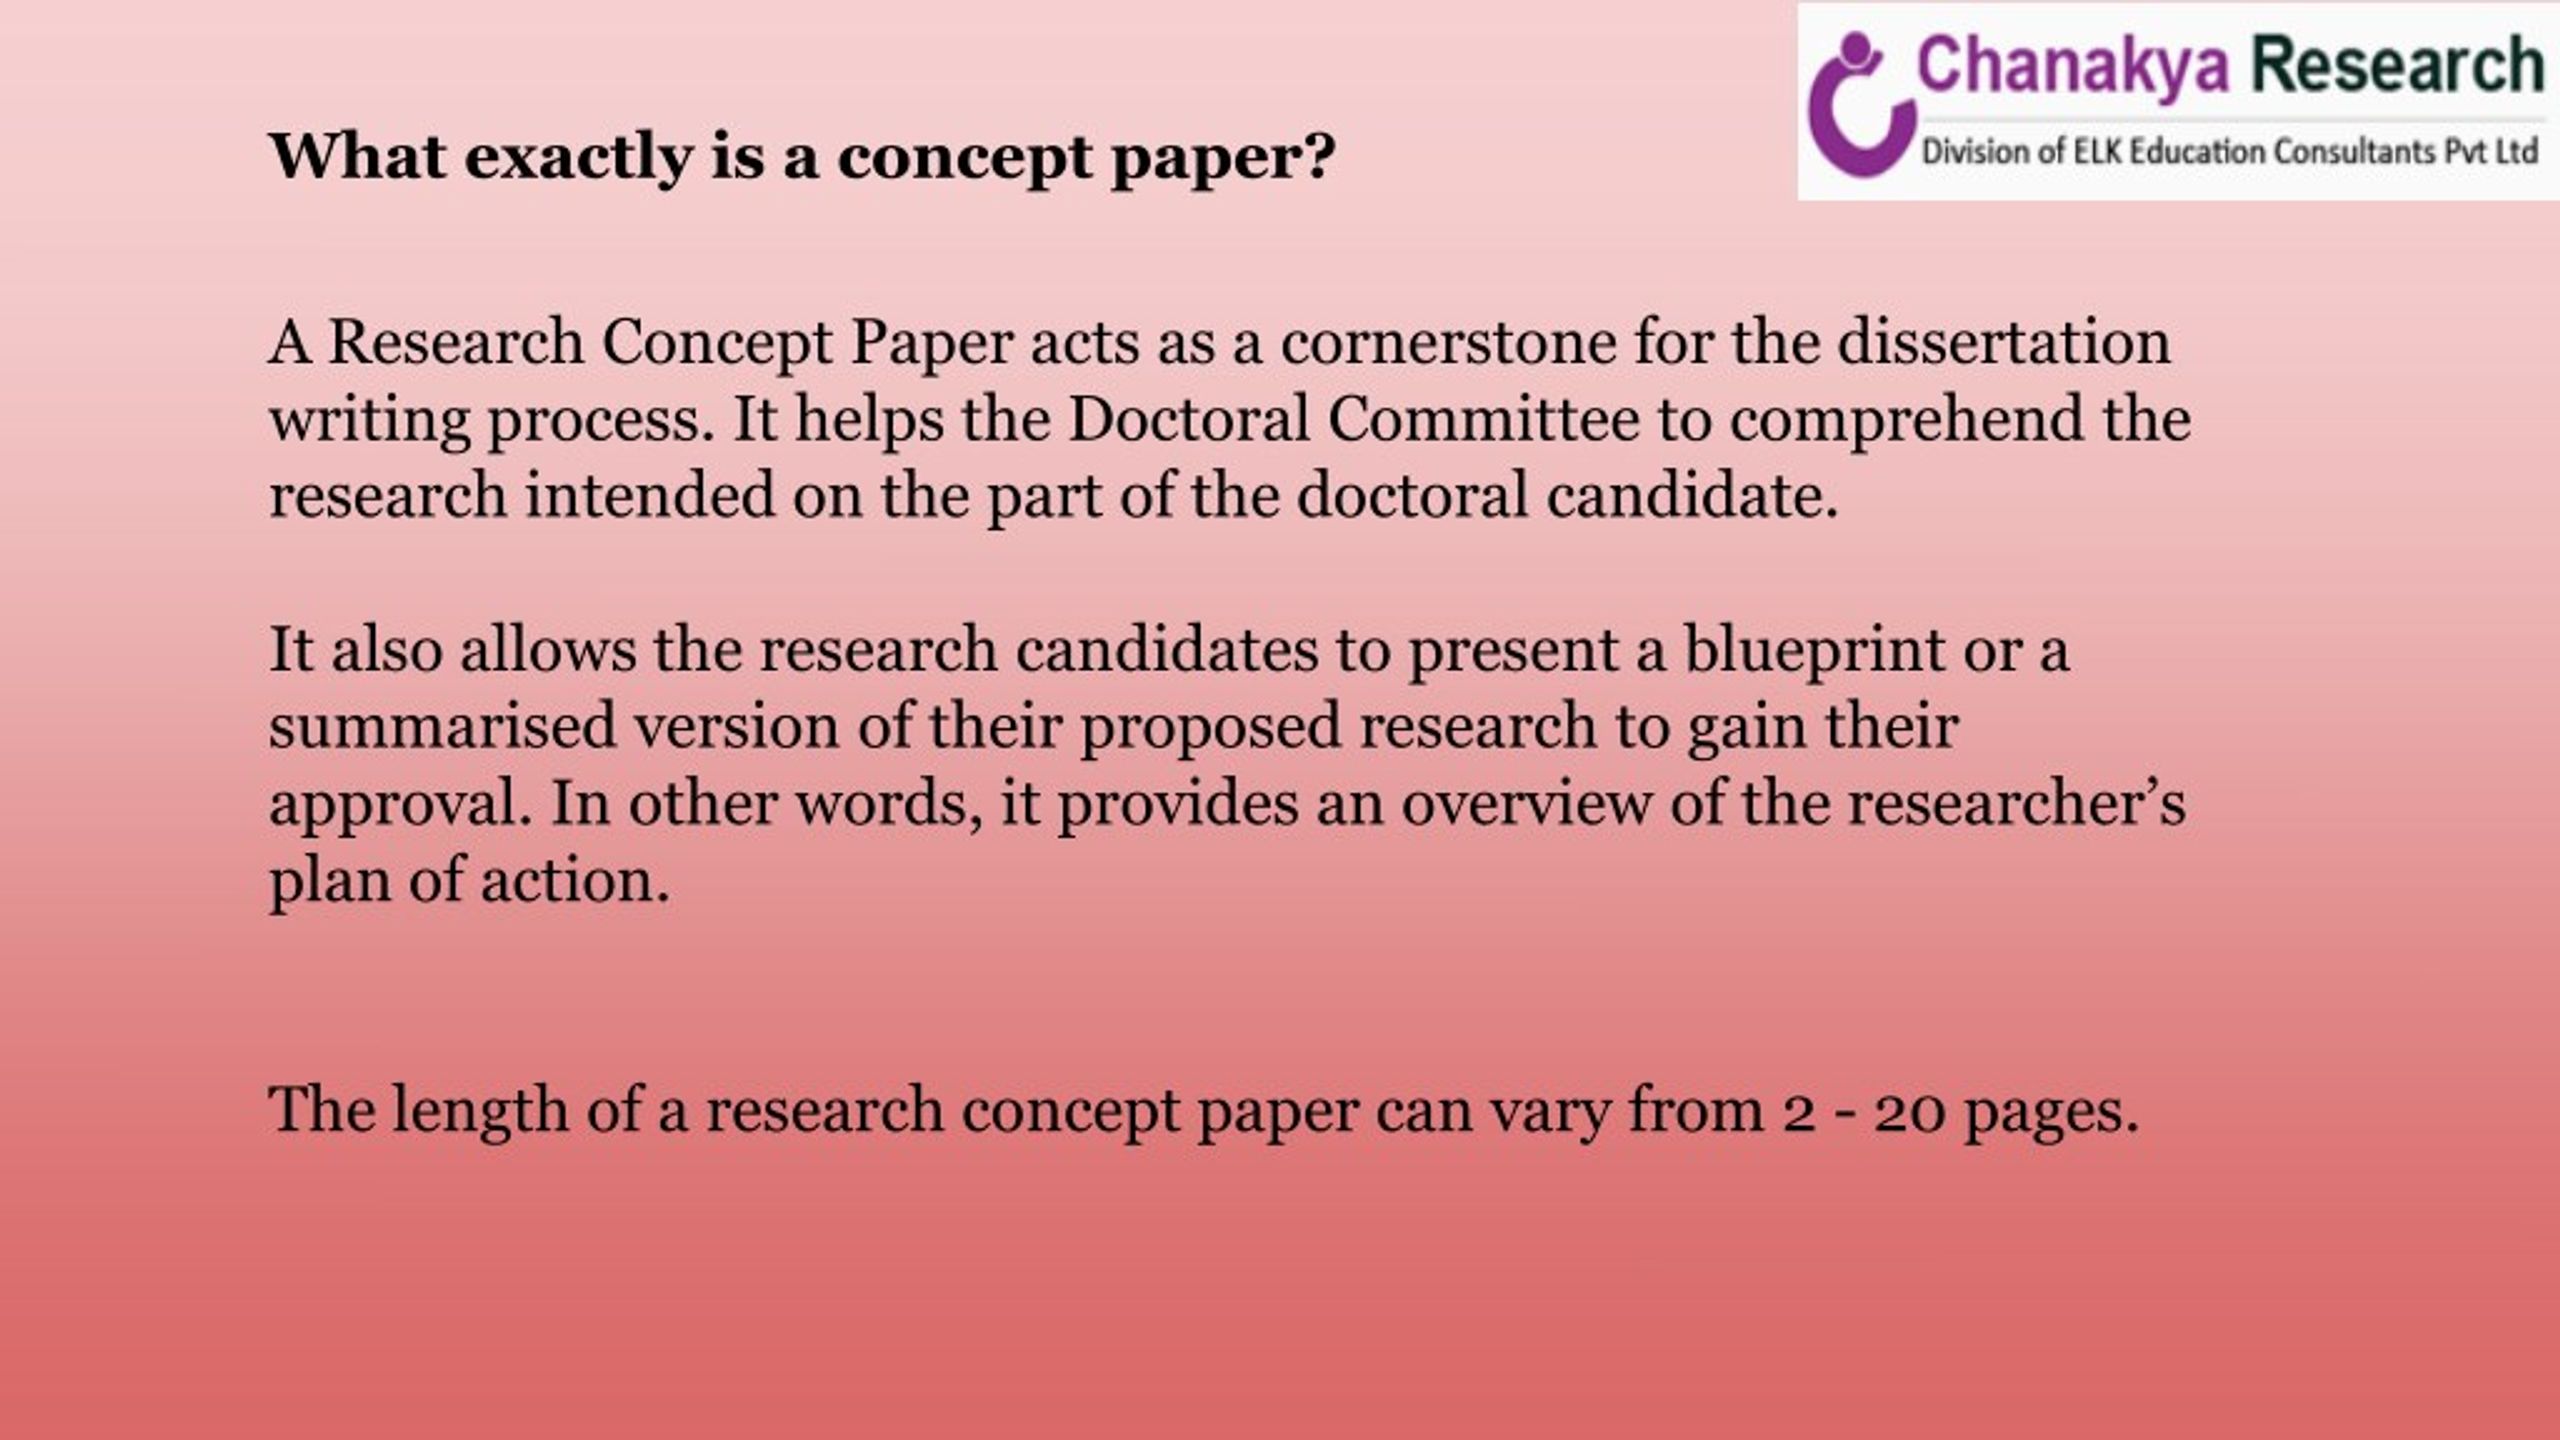 why is the concept paper relevant in research writing